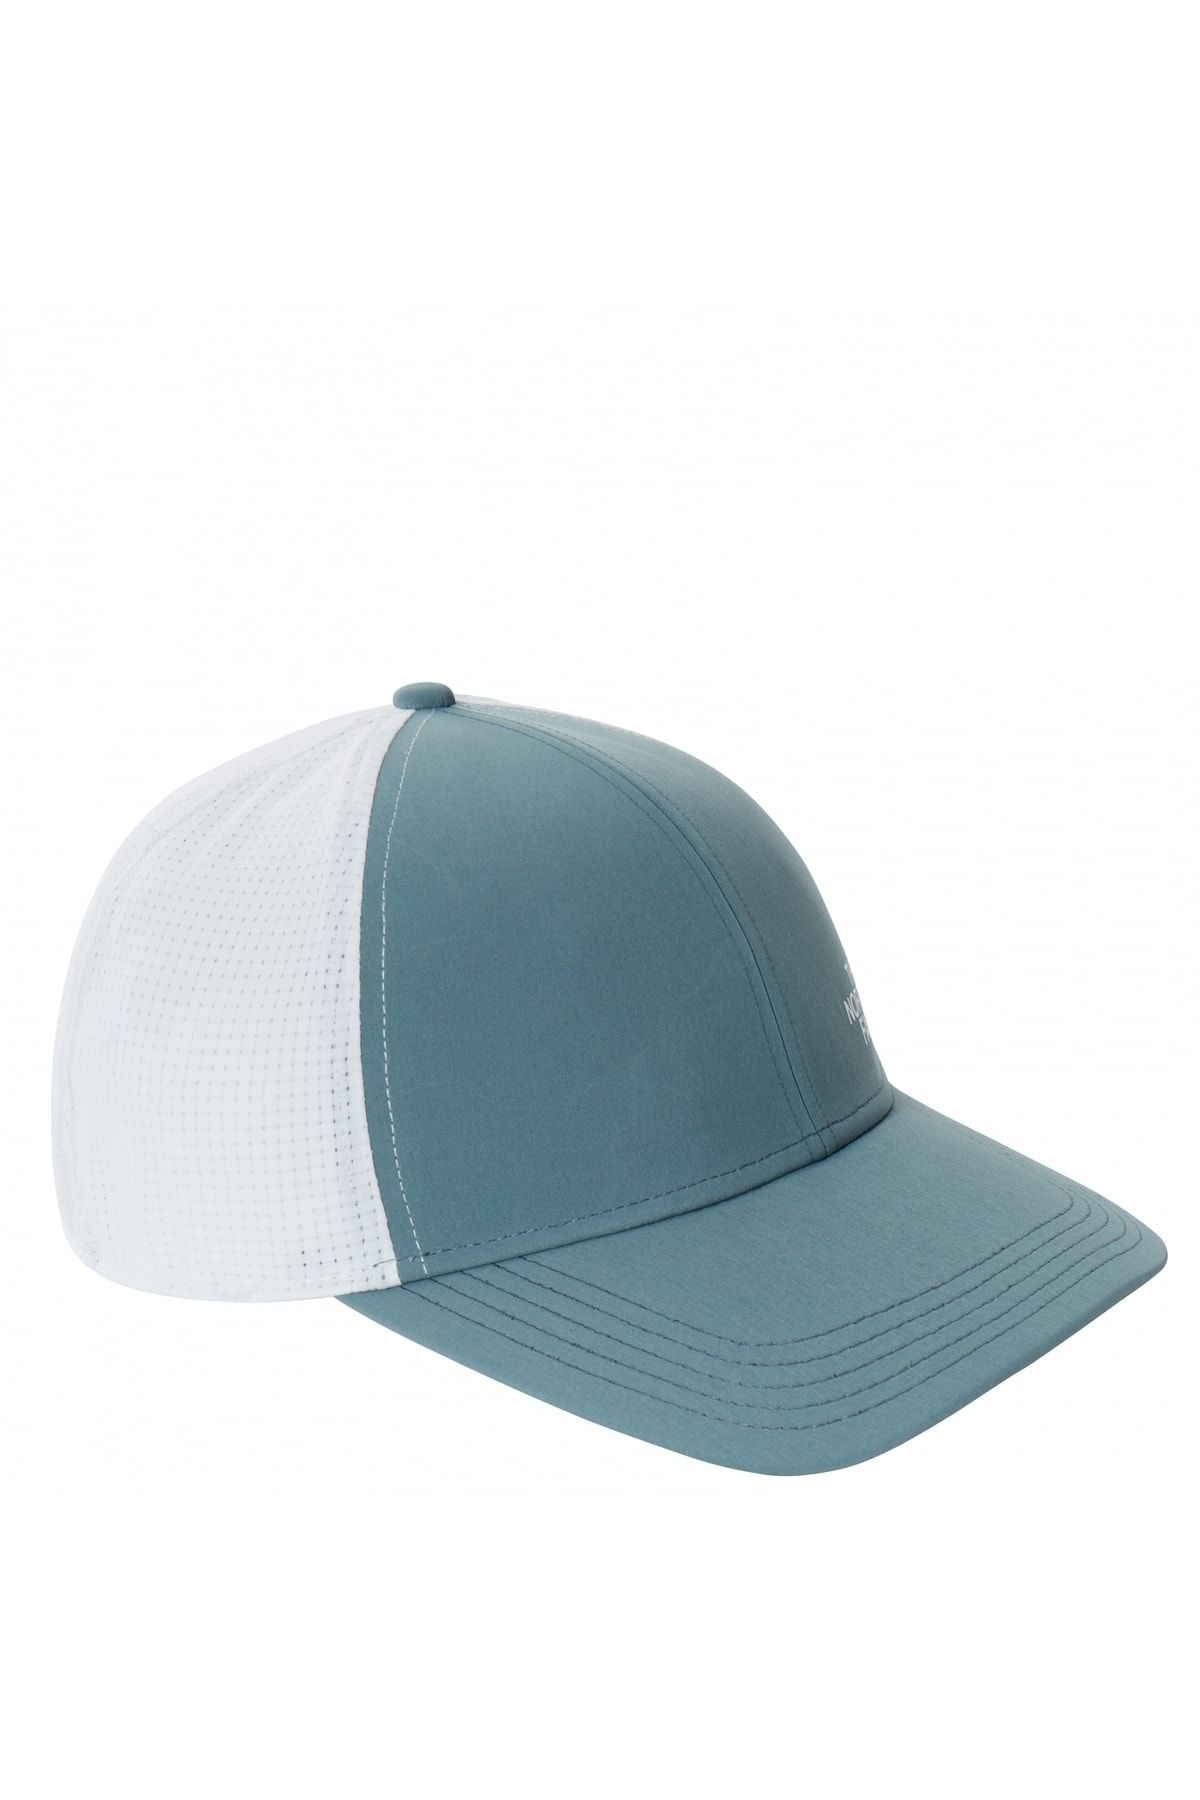 The North Face Trail Trucker 2.0 Blue Unisex HAT-NF0A5FY2A9L1